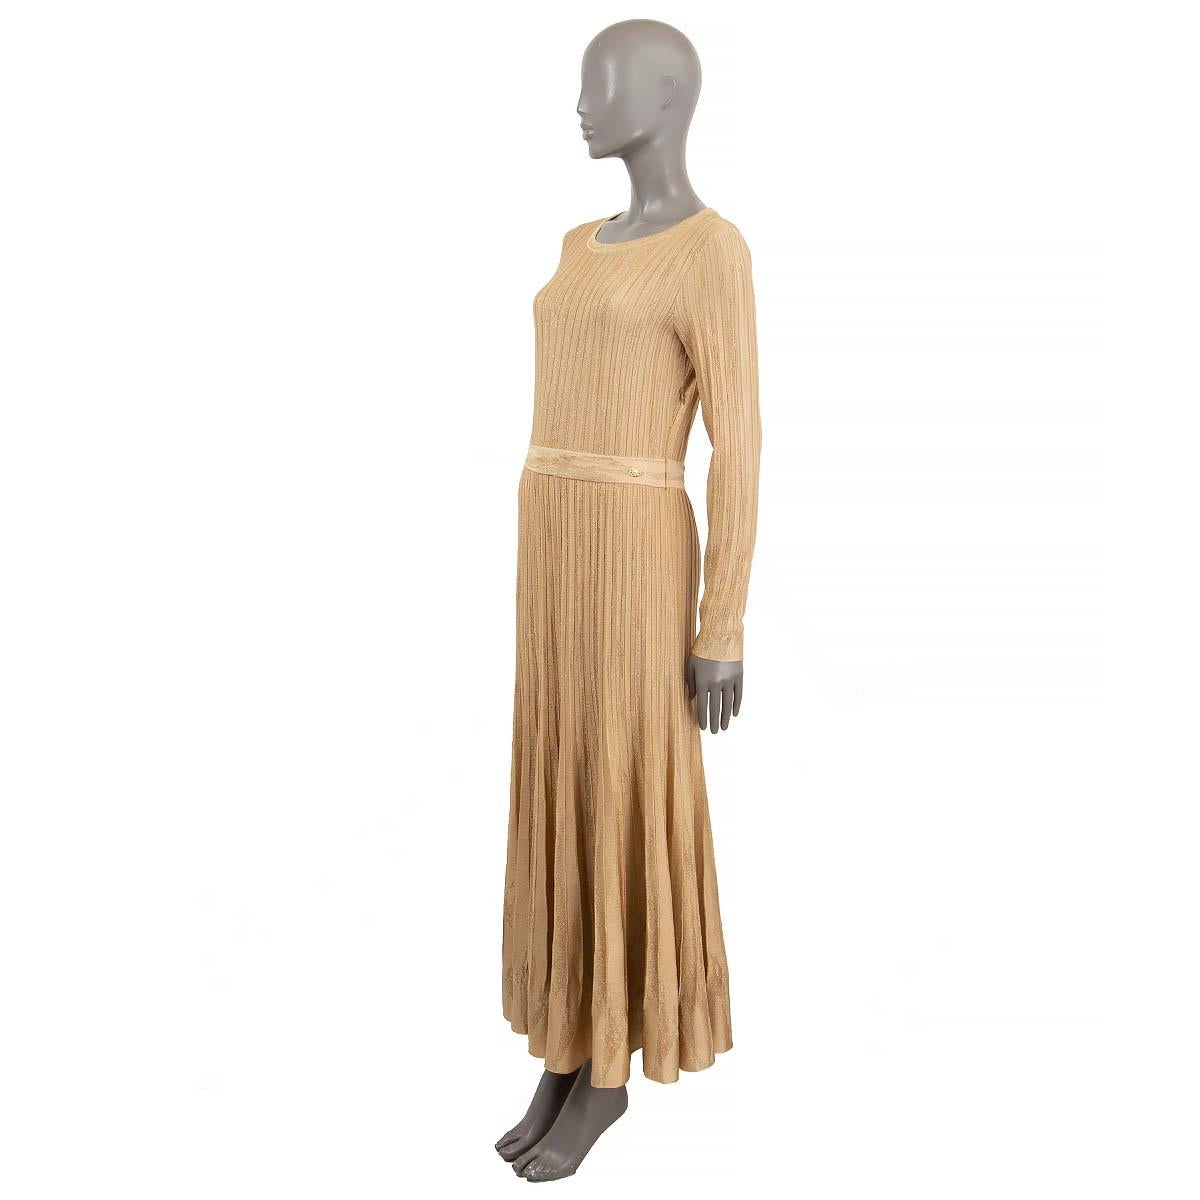 100% authentic Chanel lurex pleated knit maxi dress in gold viscose (82%), polyamide (11%) and polyester (7%). Features a round neck, long sleeves and elastic waist band with a gold-tone and pearl button. Opens with a zipper on the side. Unlined.